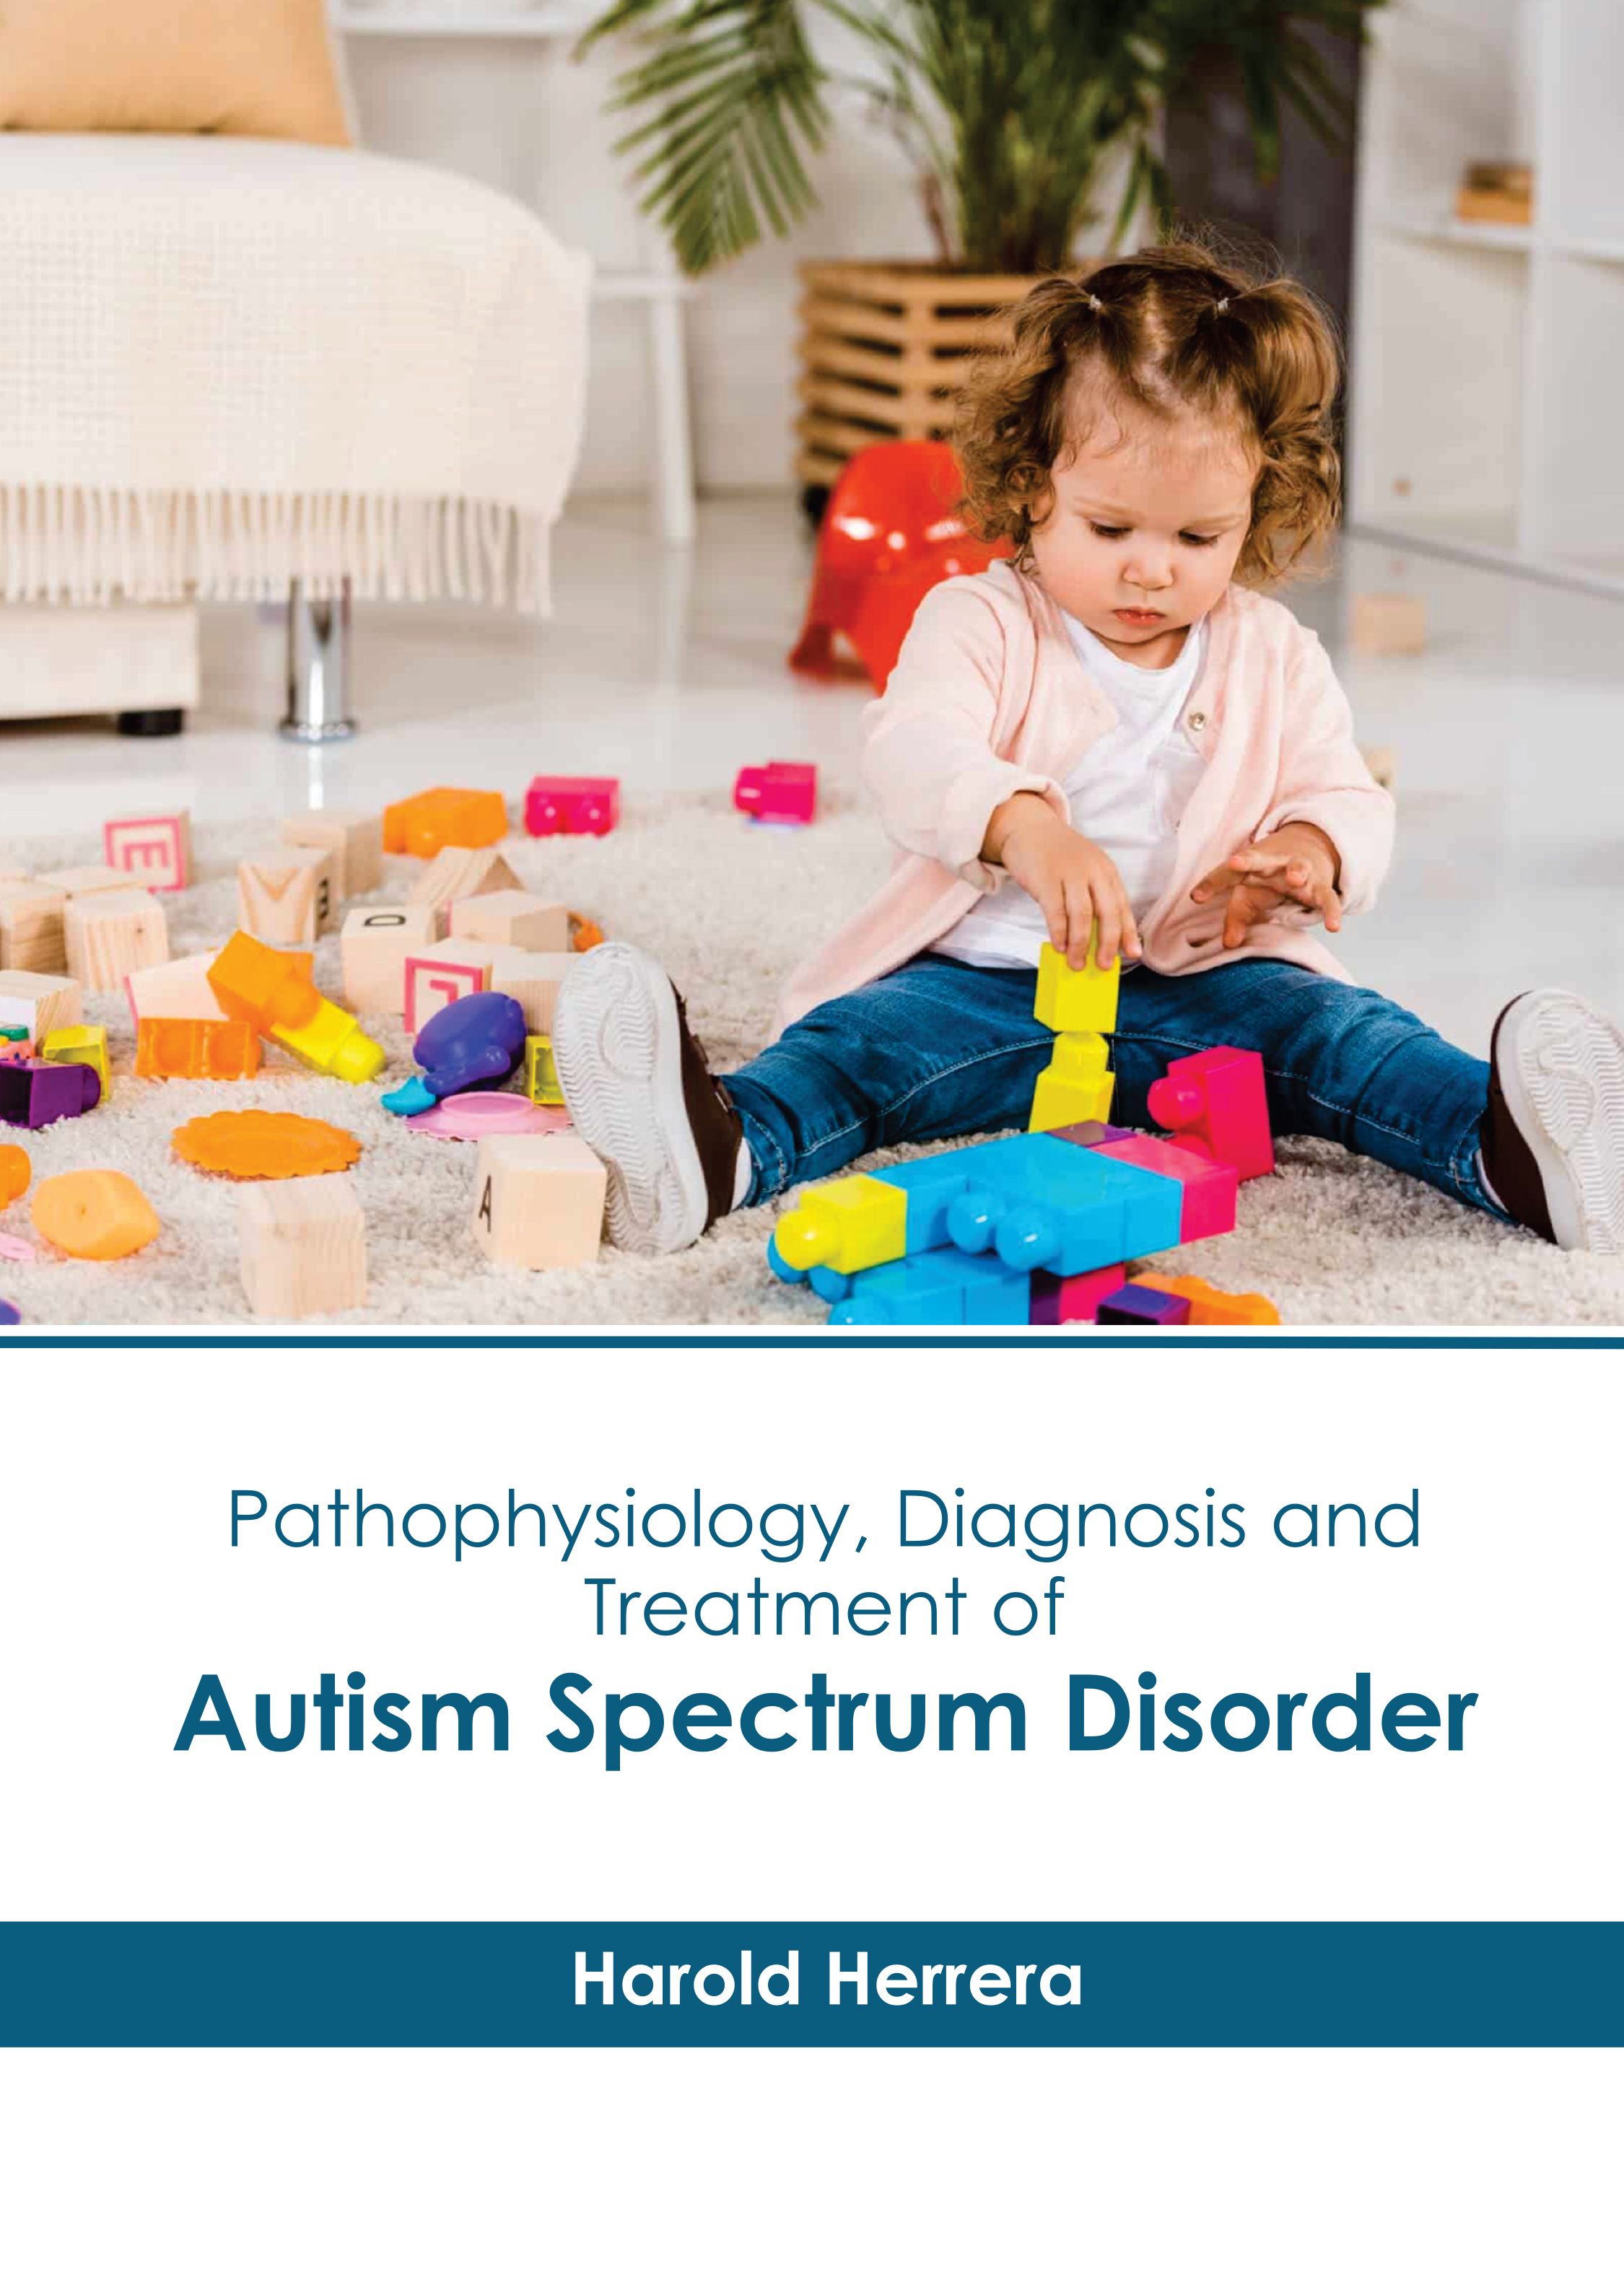 PATHOPHYSIOLOGY, DIAGNOSIS AND TREATMENT OF AUTISM SPECTRUM DISORDER